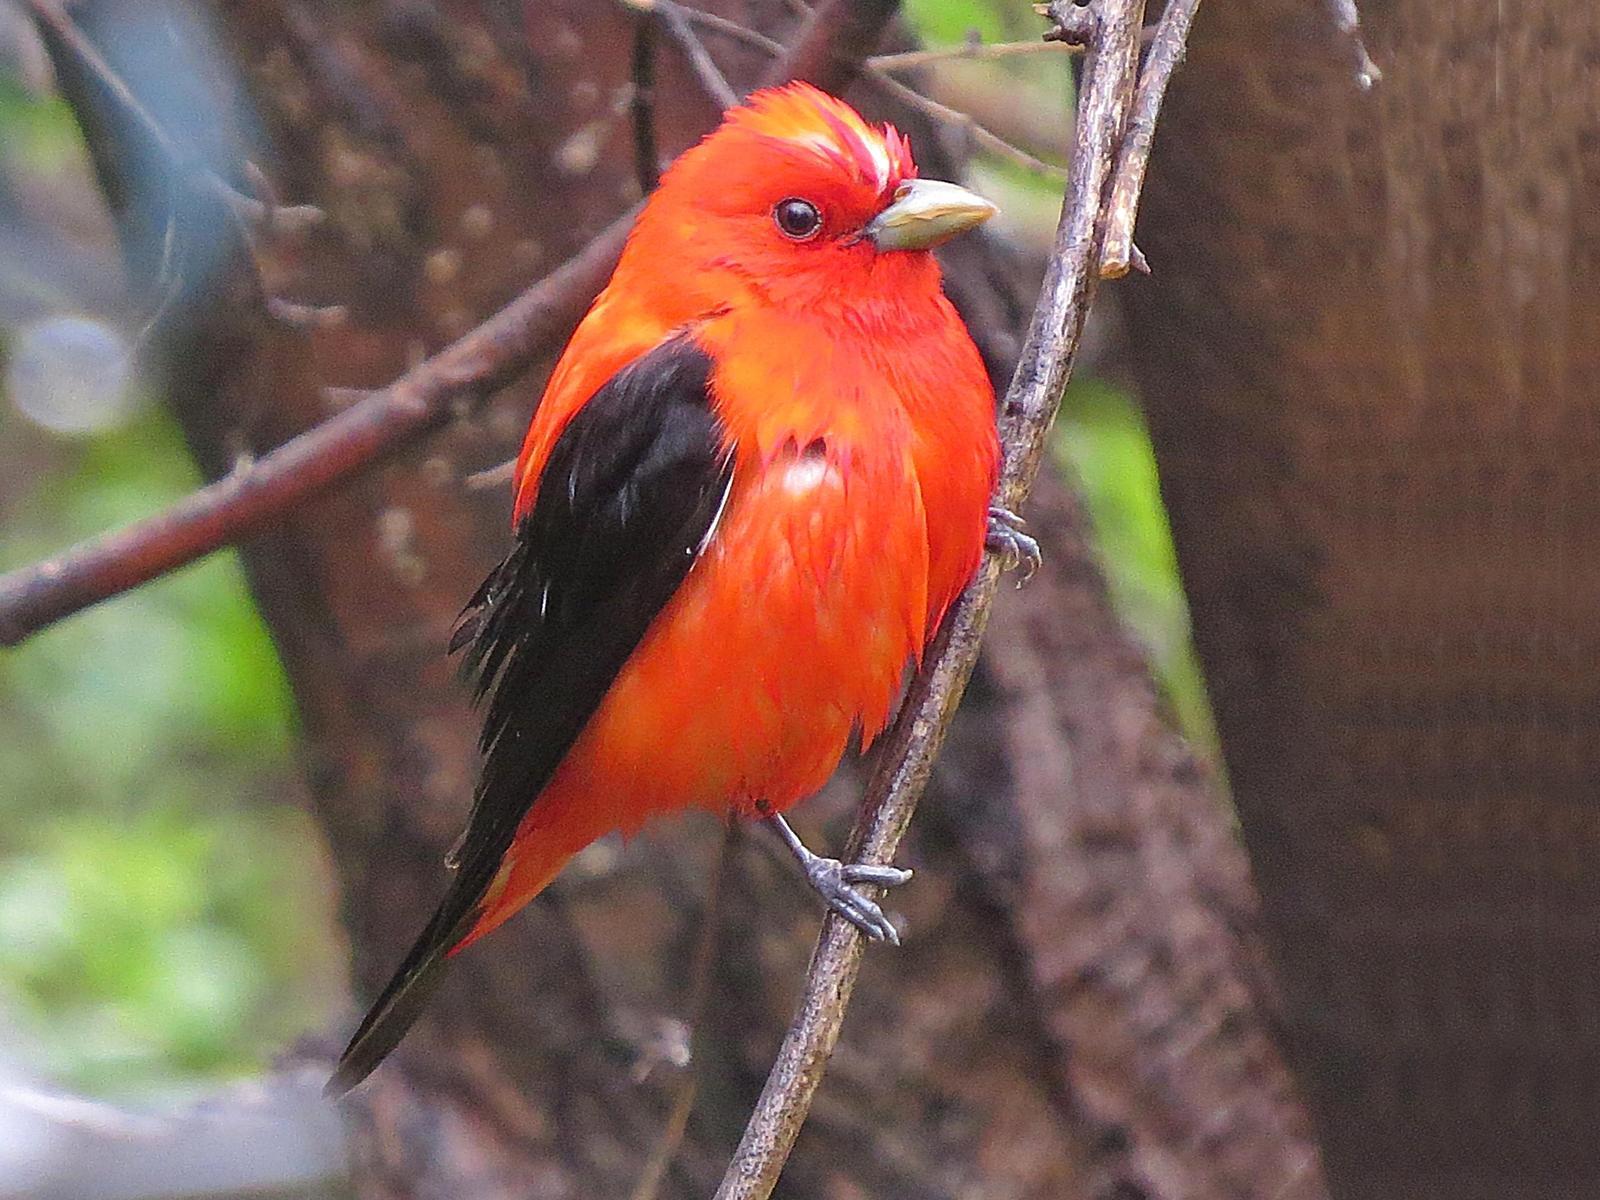 Scarlet Tanager Photo by Bob Neugebauer